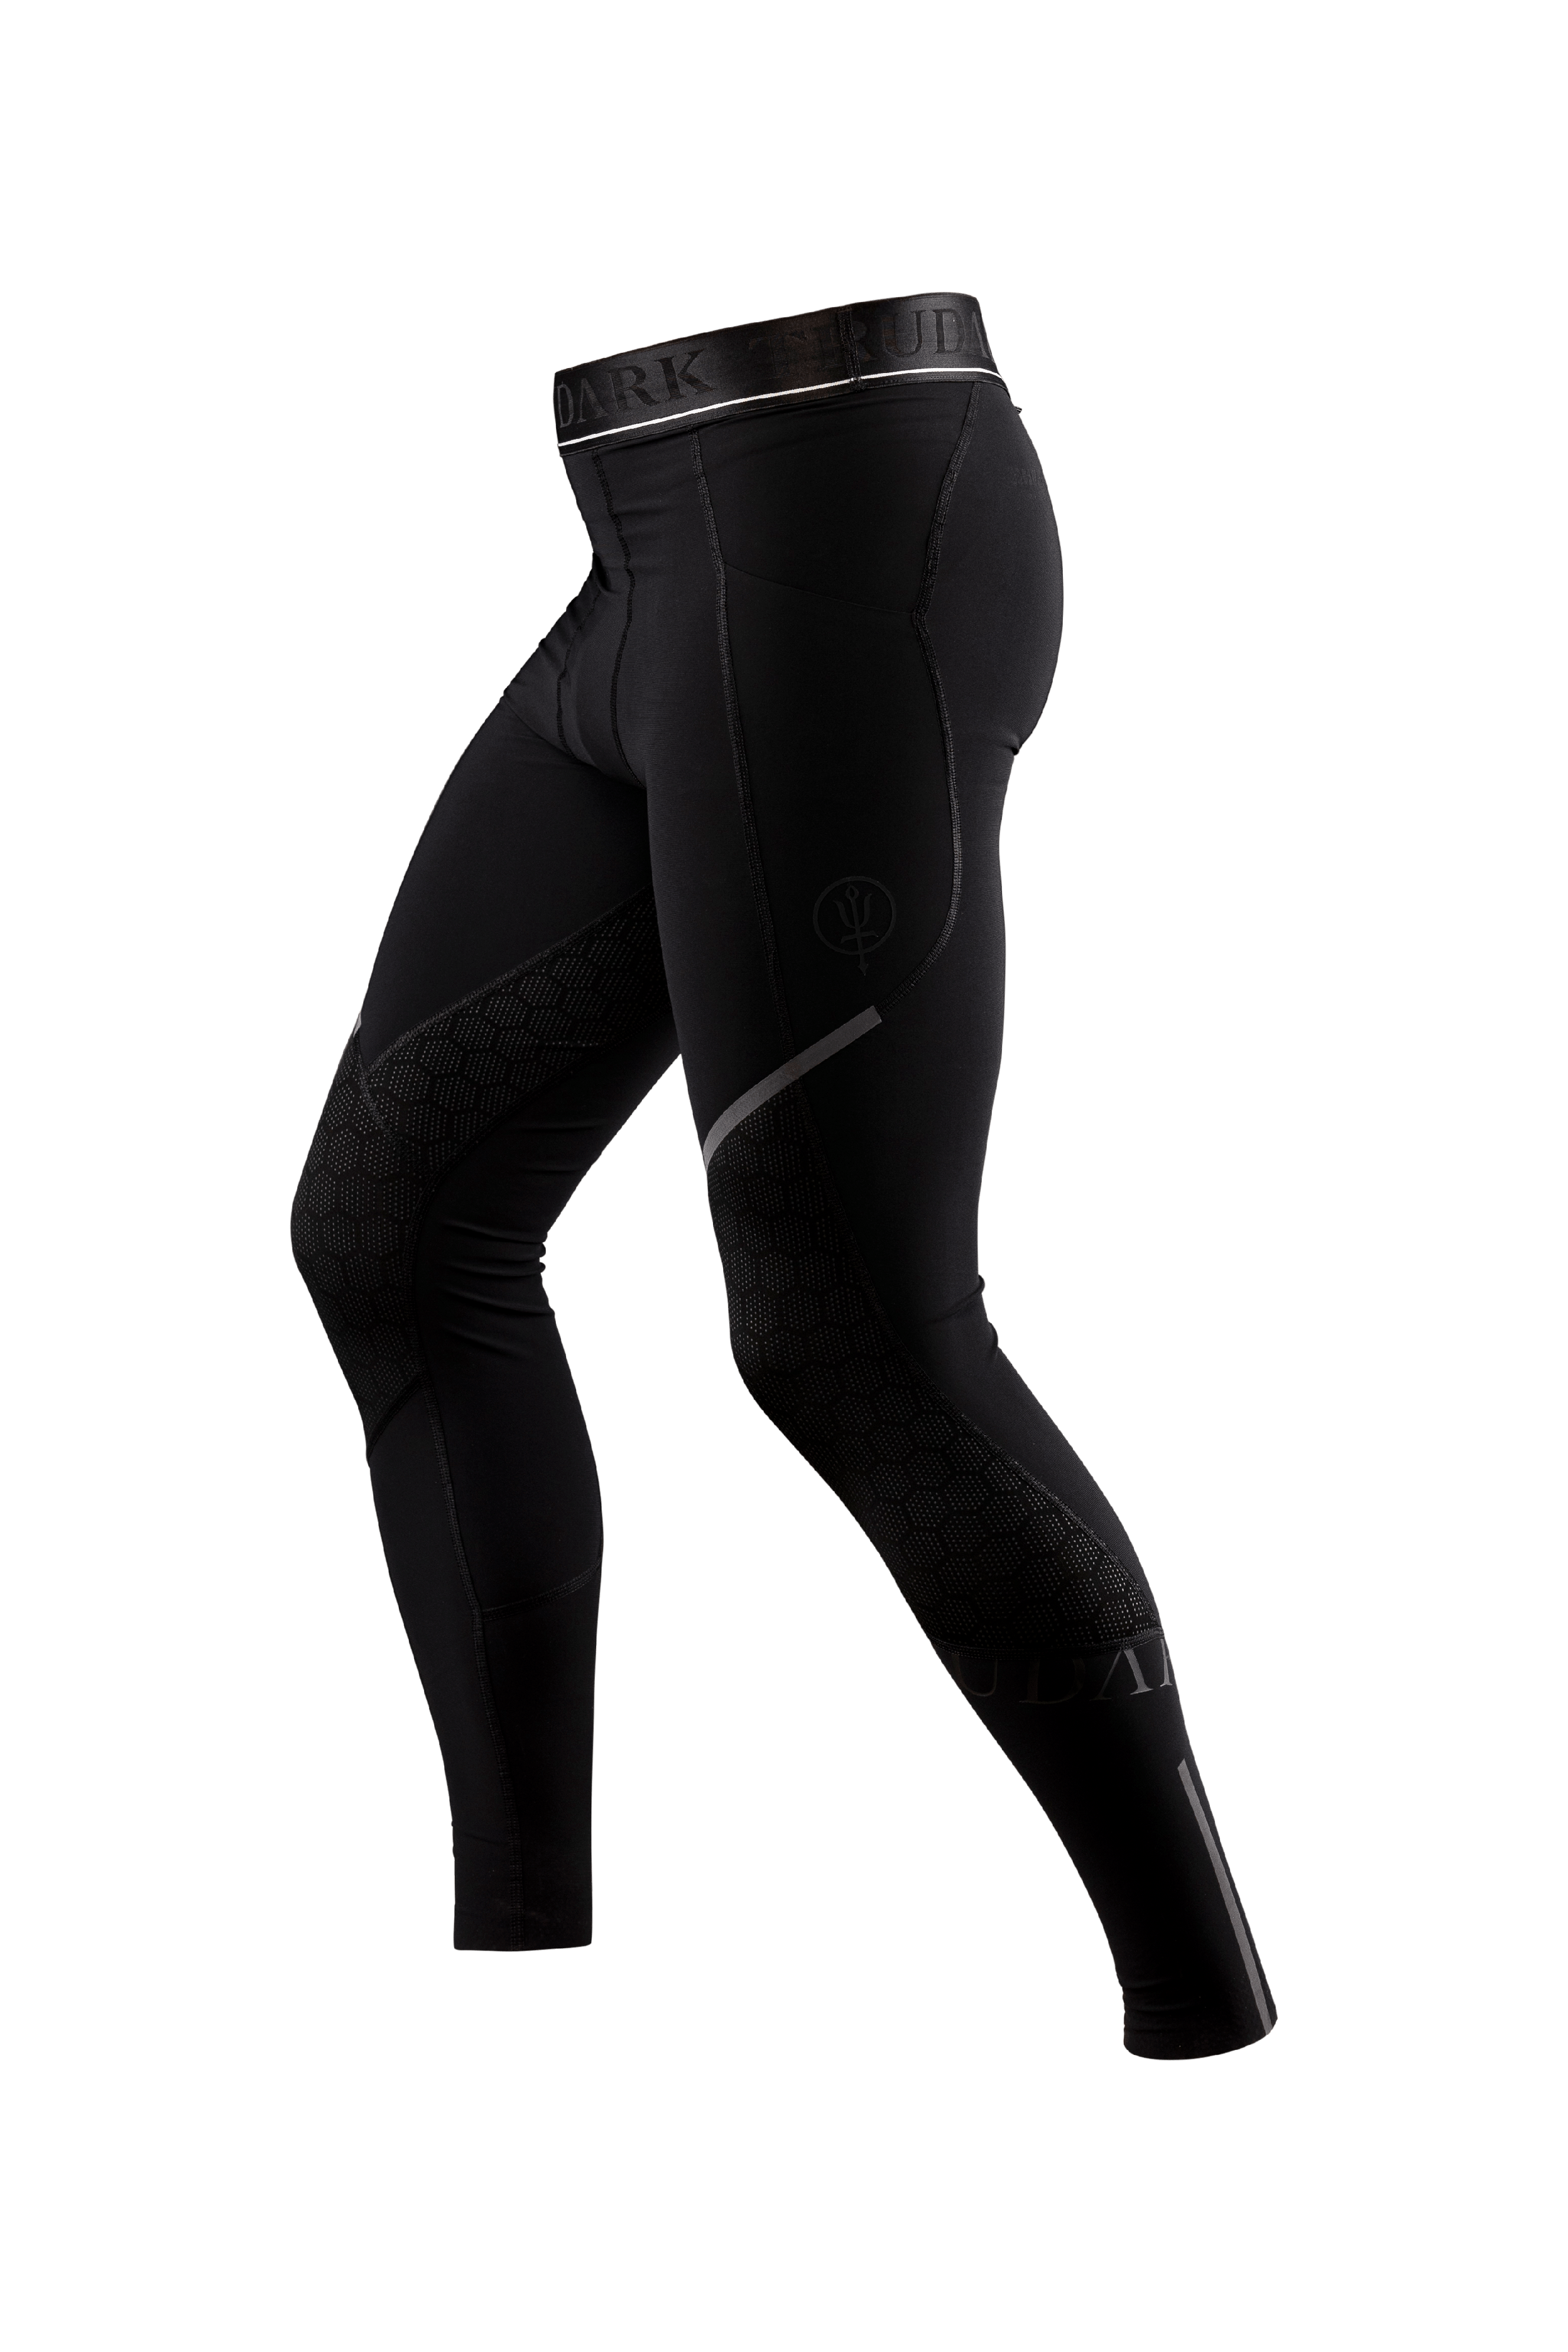 Force Tech Leggings  Running Leggings For Workouts Or Gym 3xl